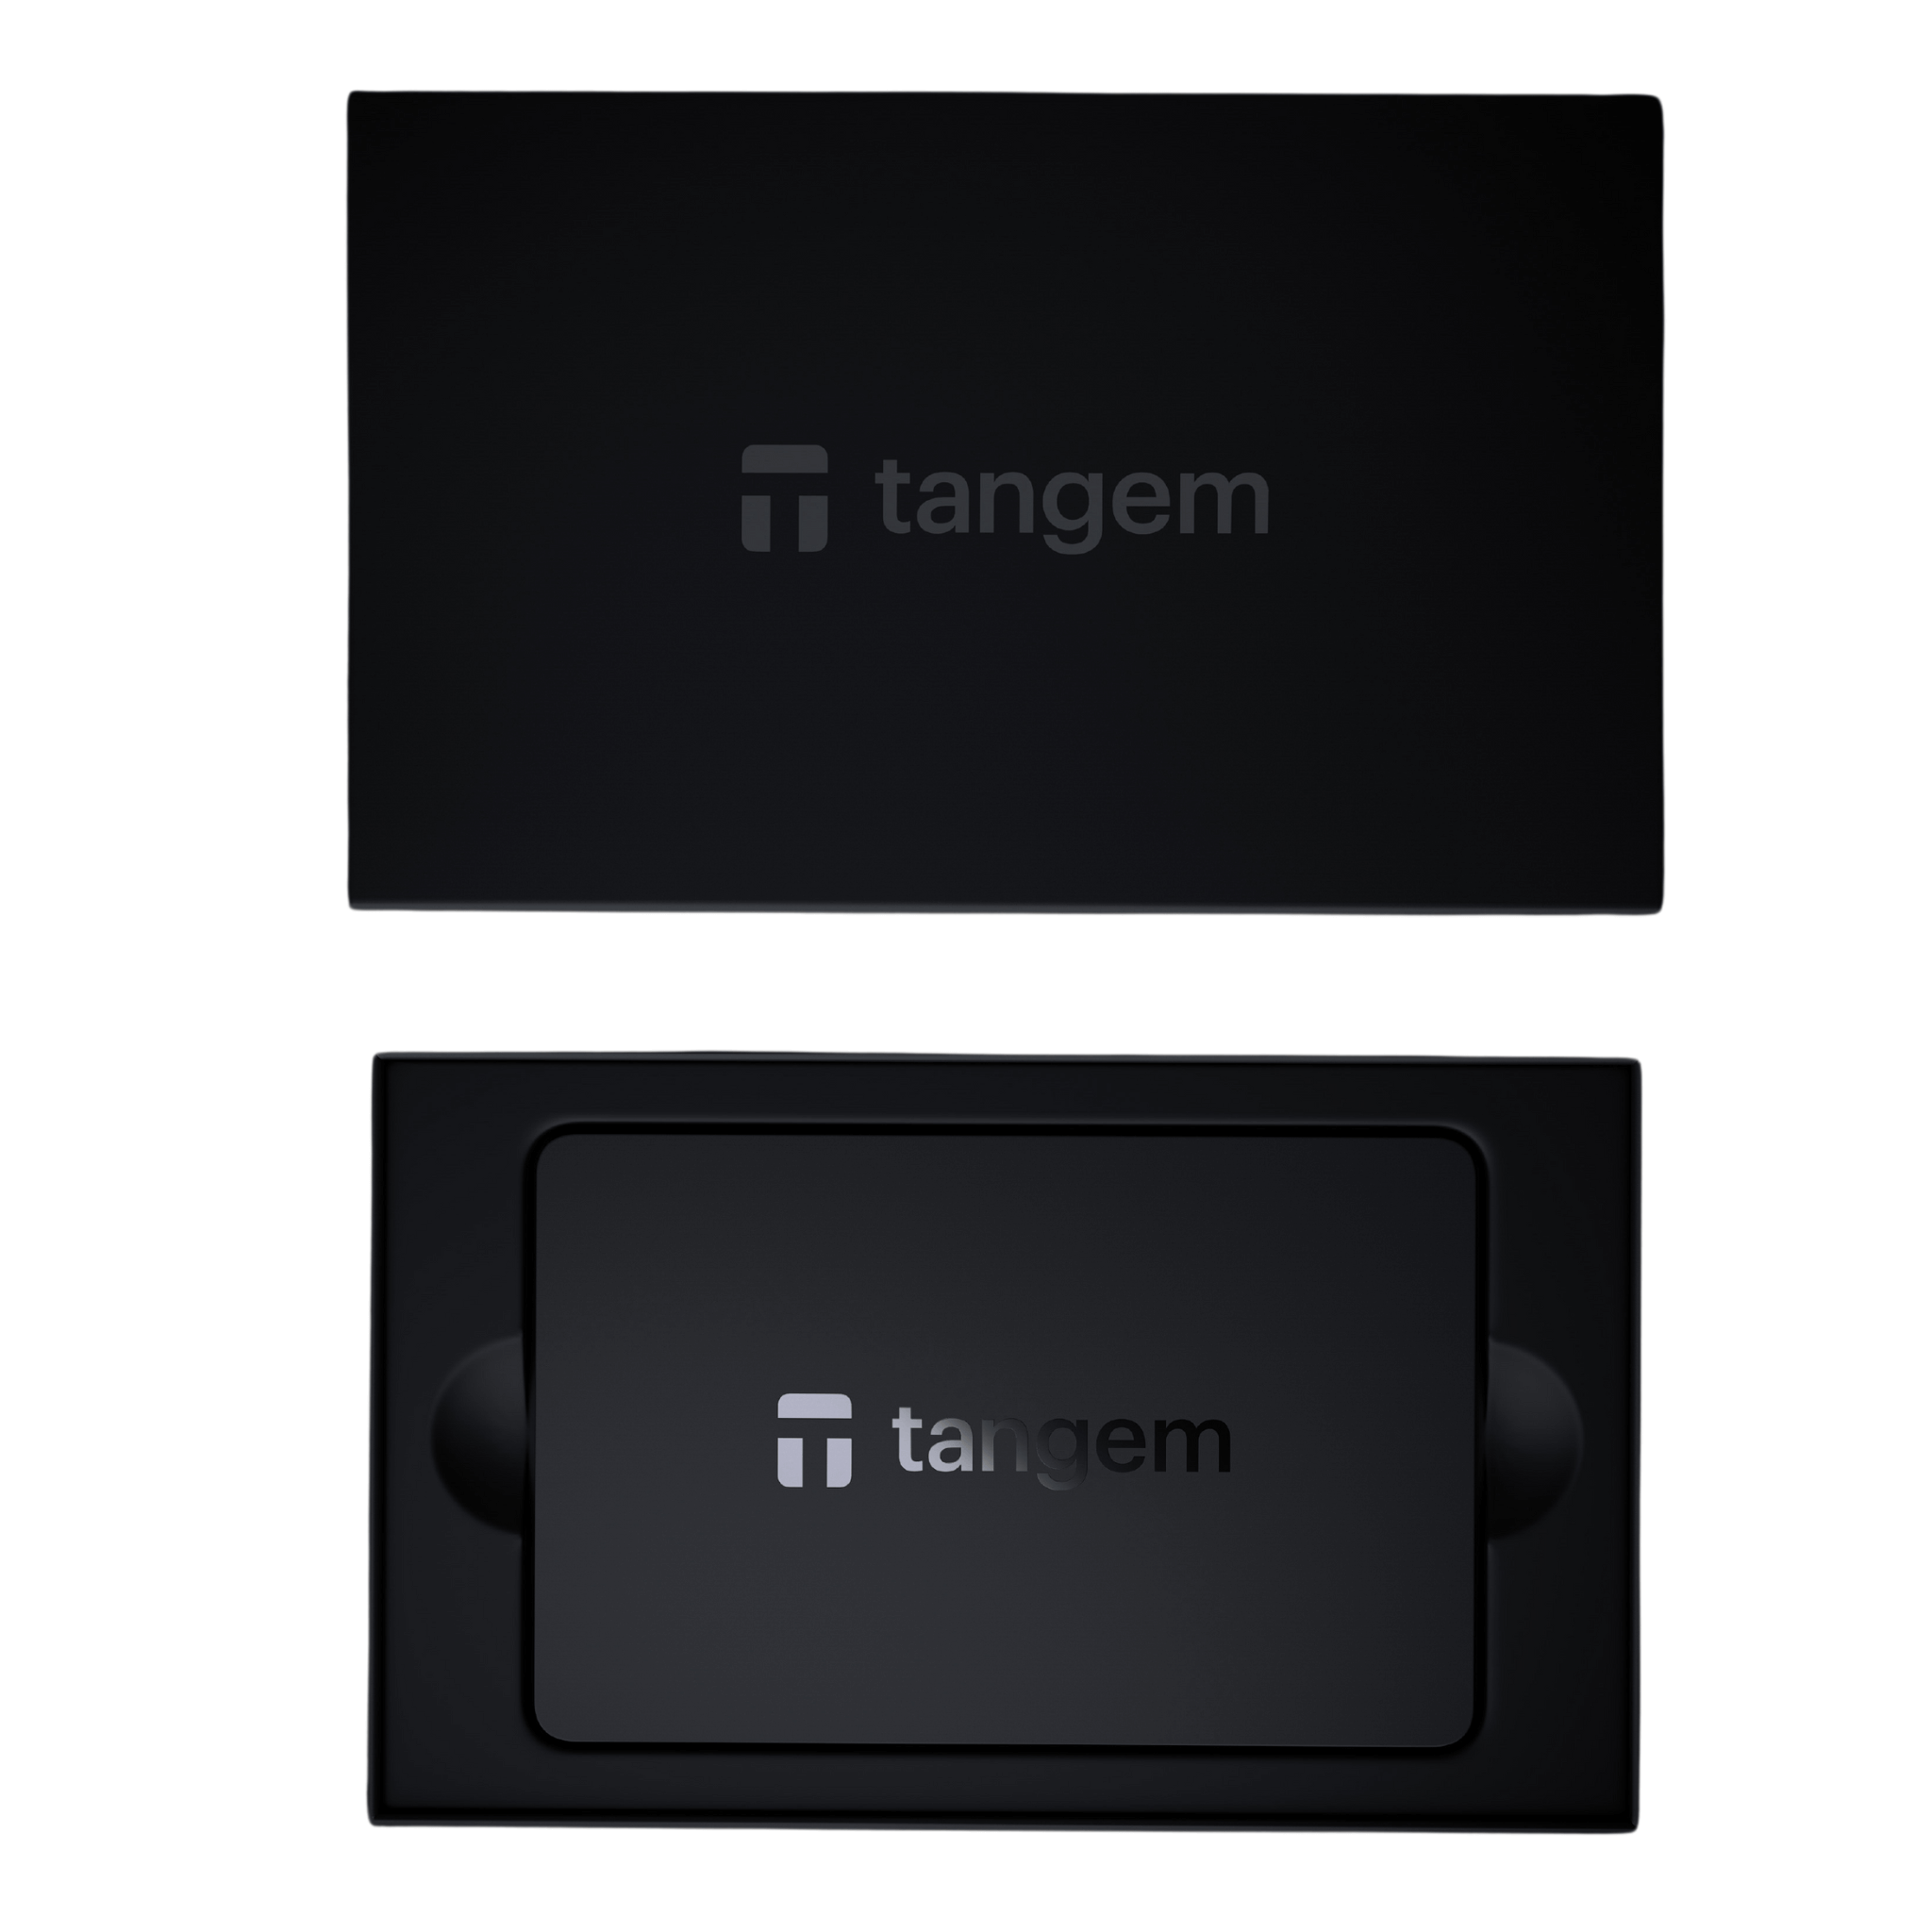 Tangem Wallet 2.0 3 Card Cryptocurrency Hardware Wallet Package Contents